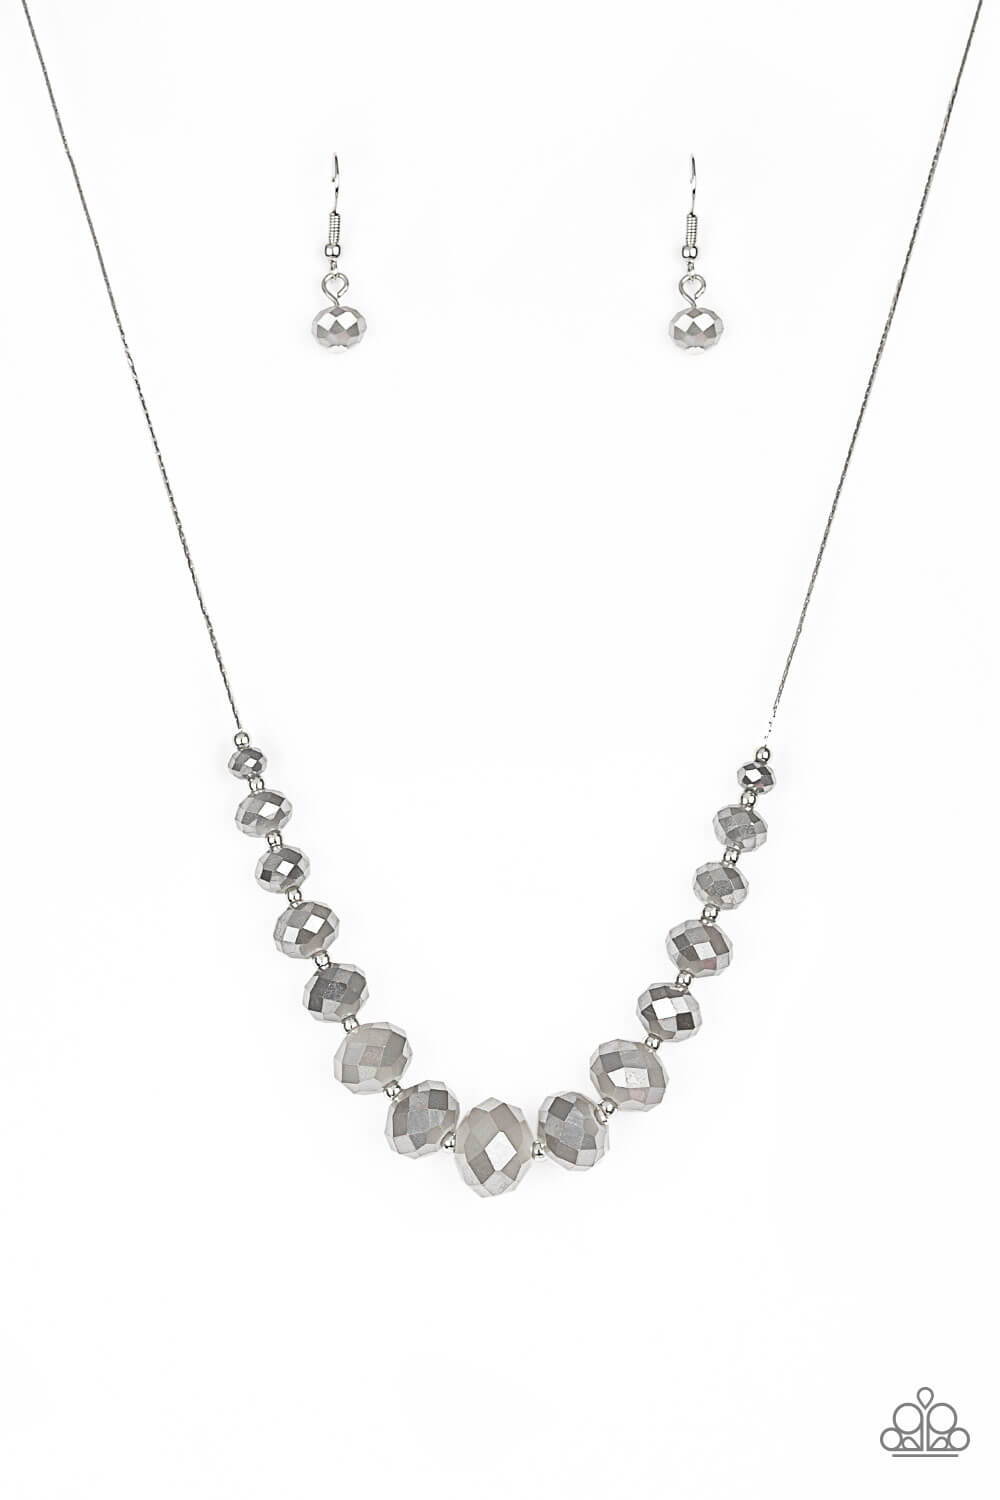 Crystal Carriages - Silver Necklace Set - Princess Glam Shop